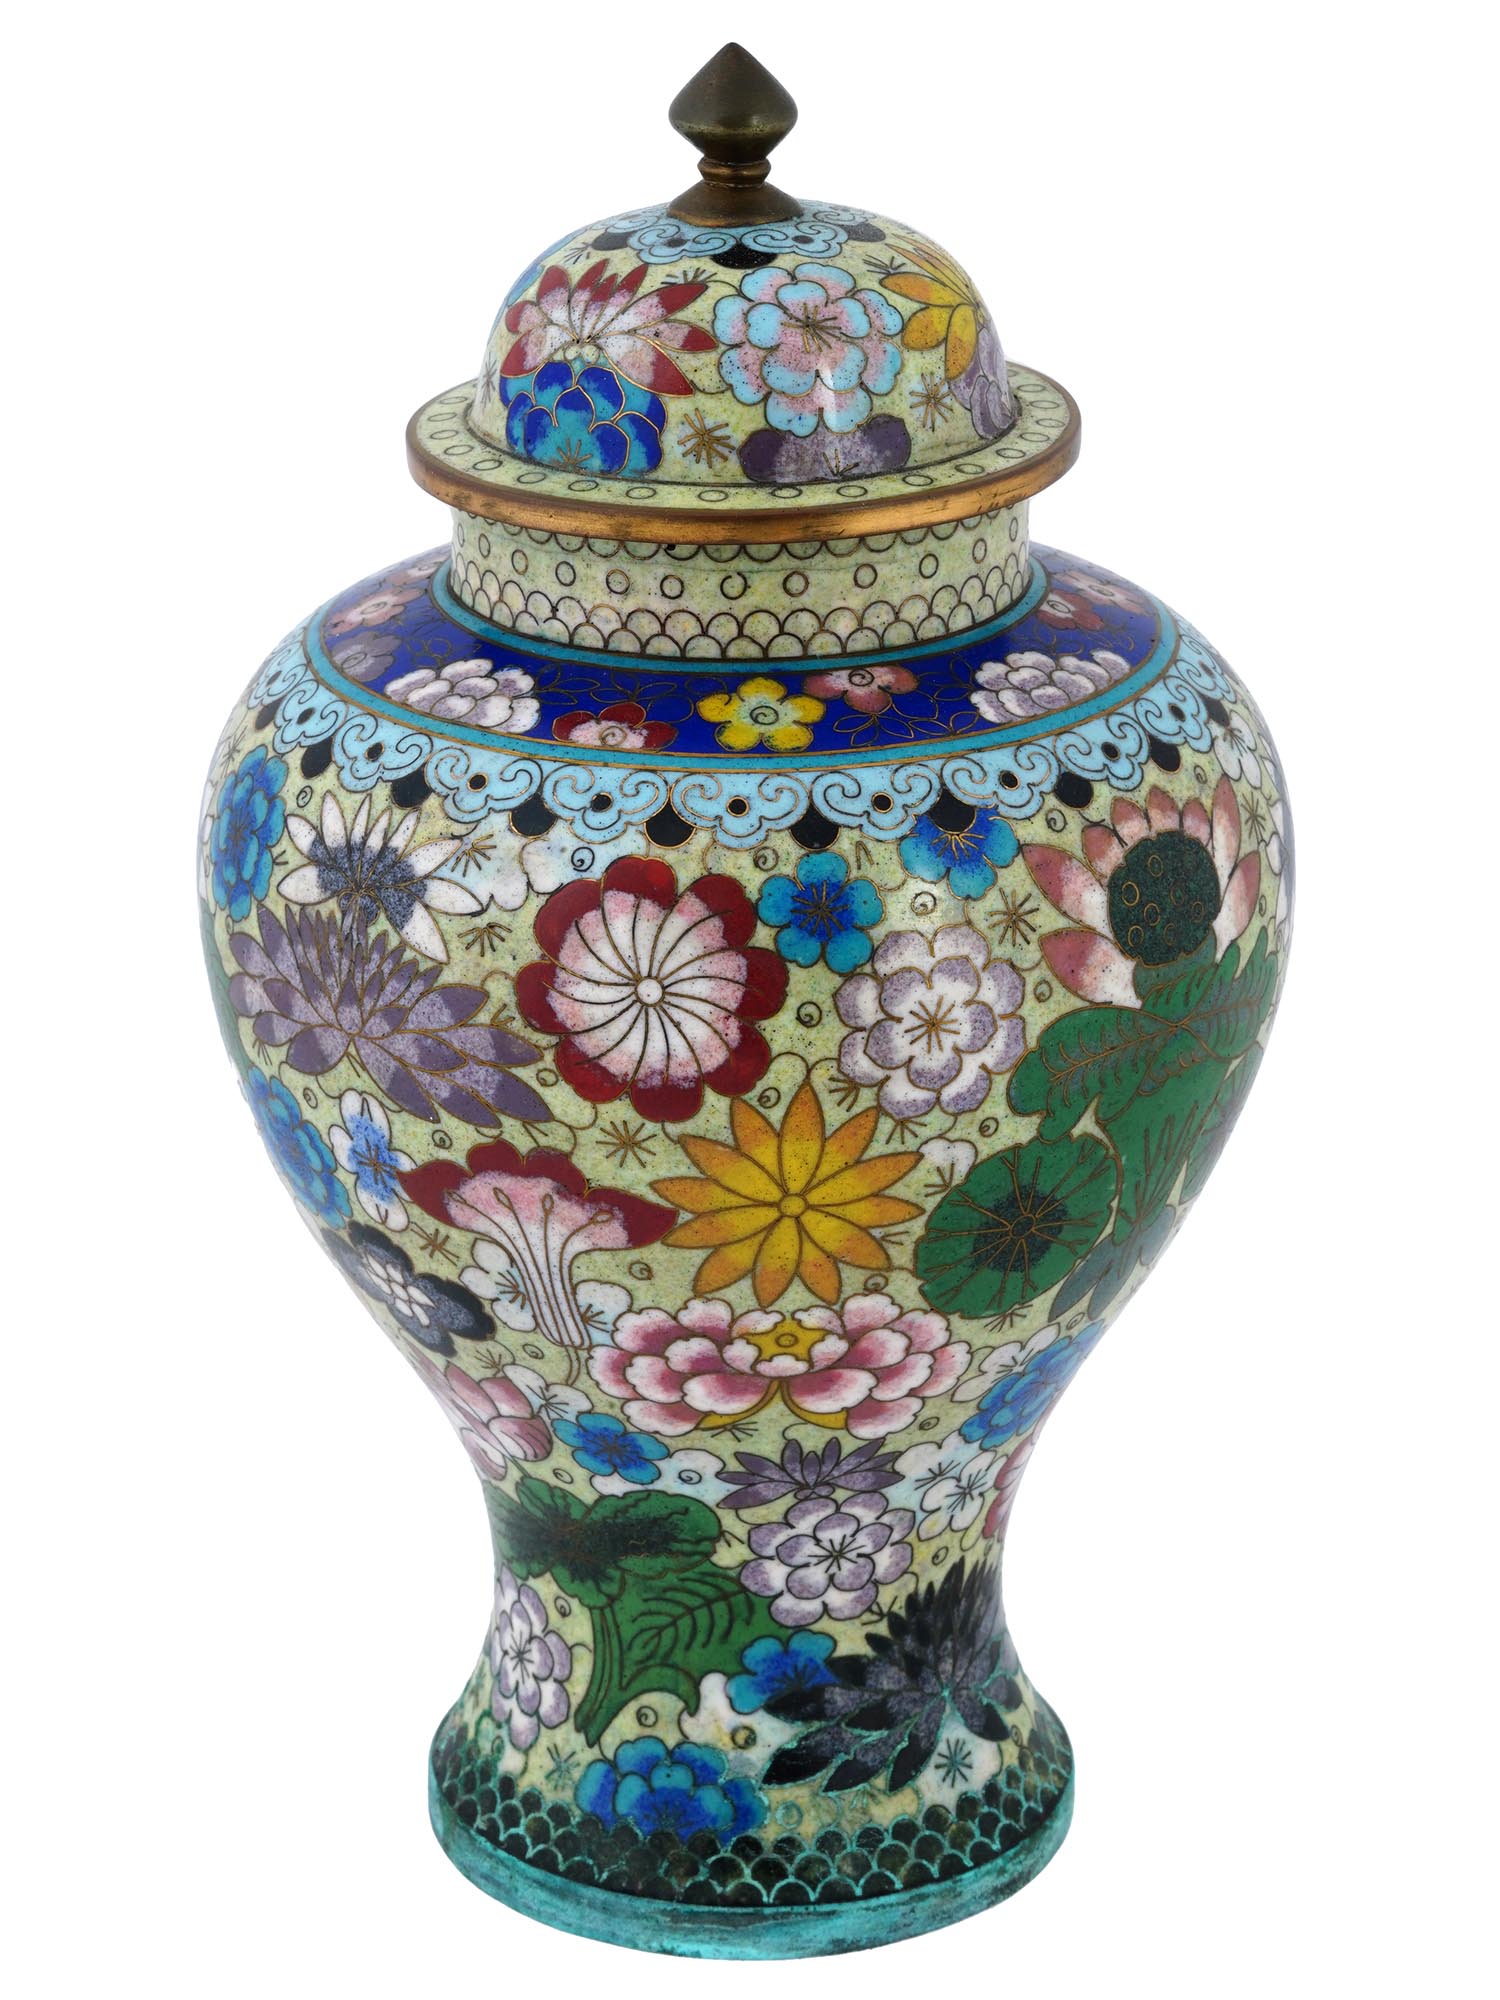 ANTIQUE CHINESE QING DYNASTY CLOISONNE LIDDED JAR PIC-2